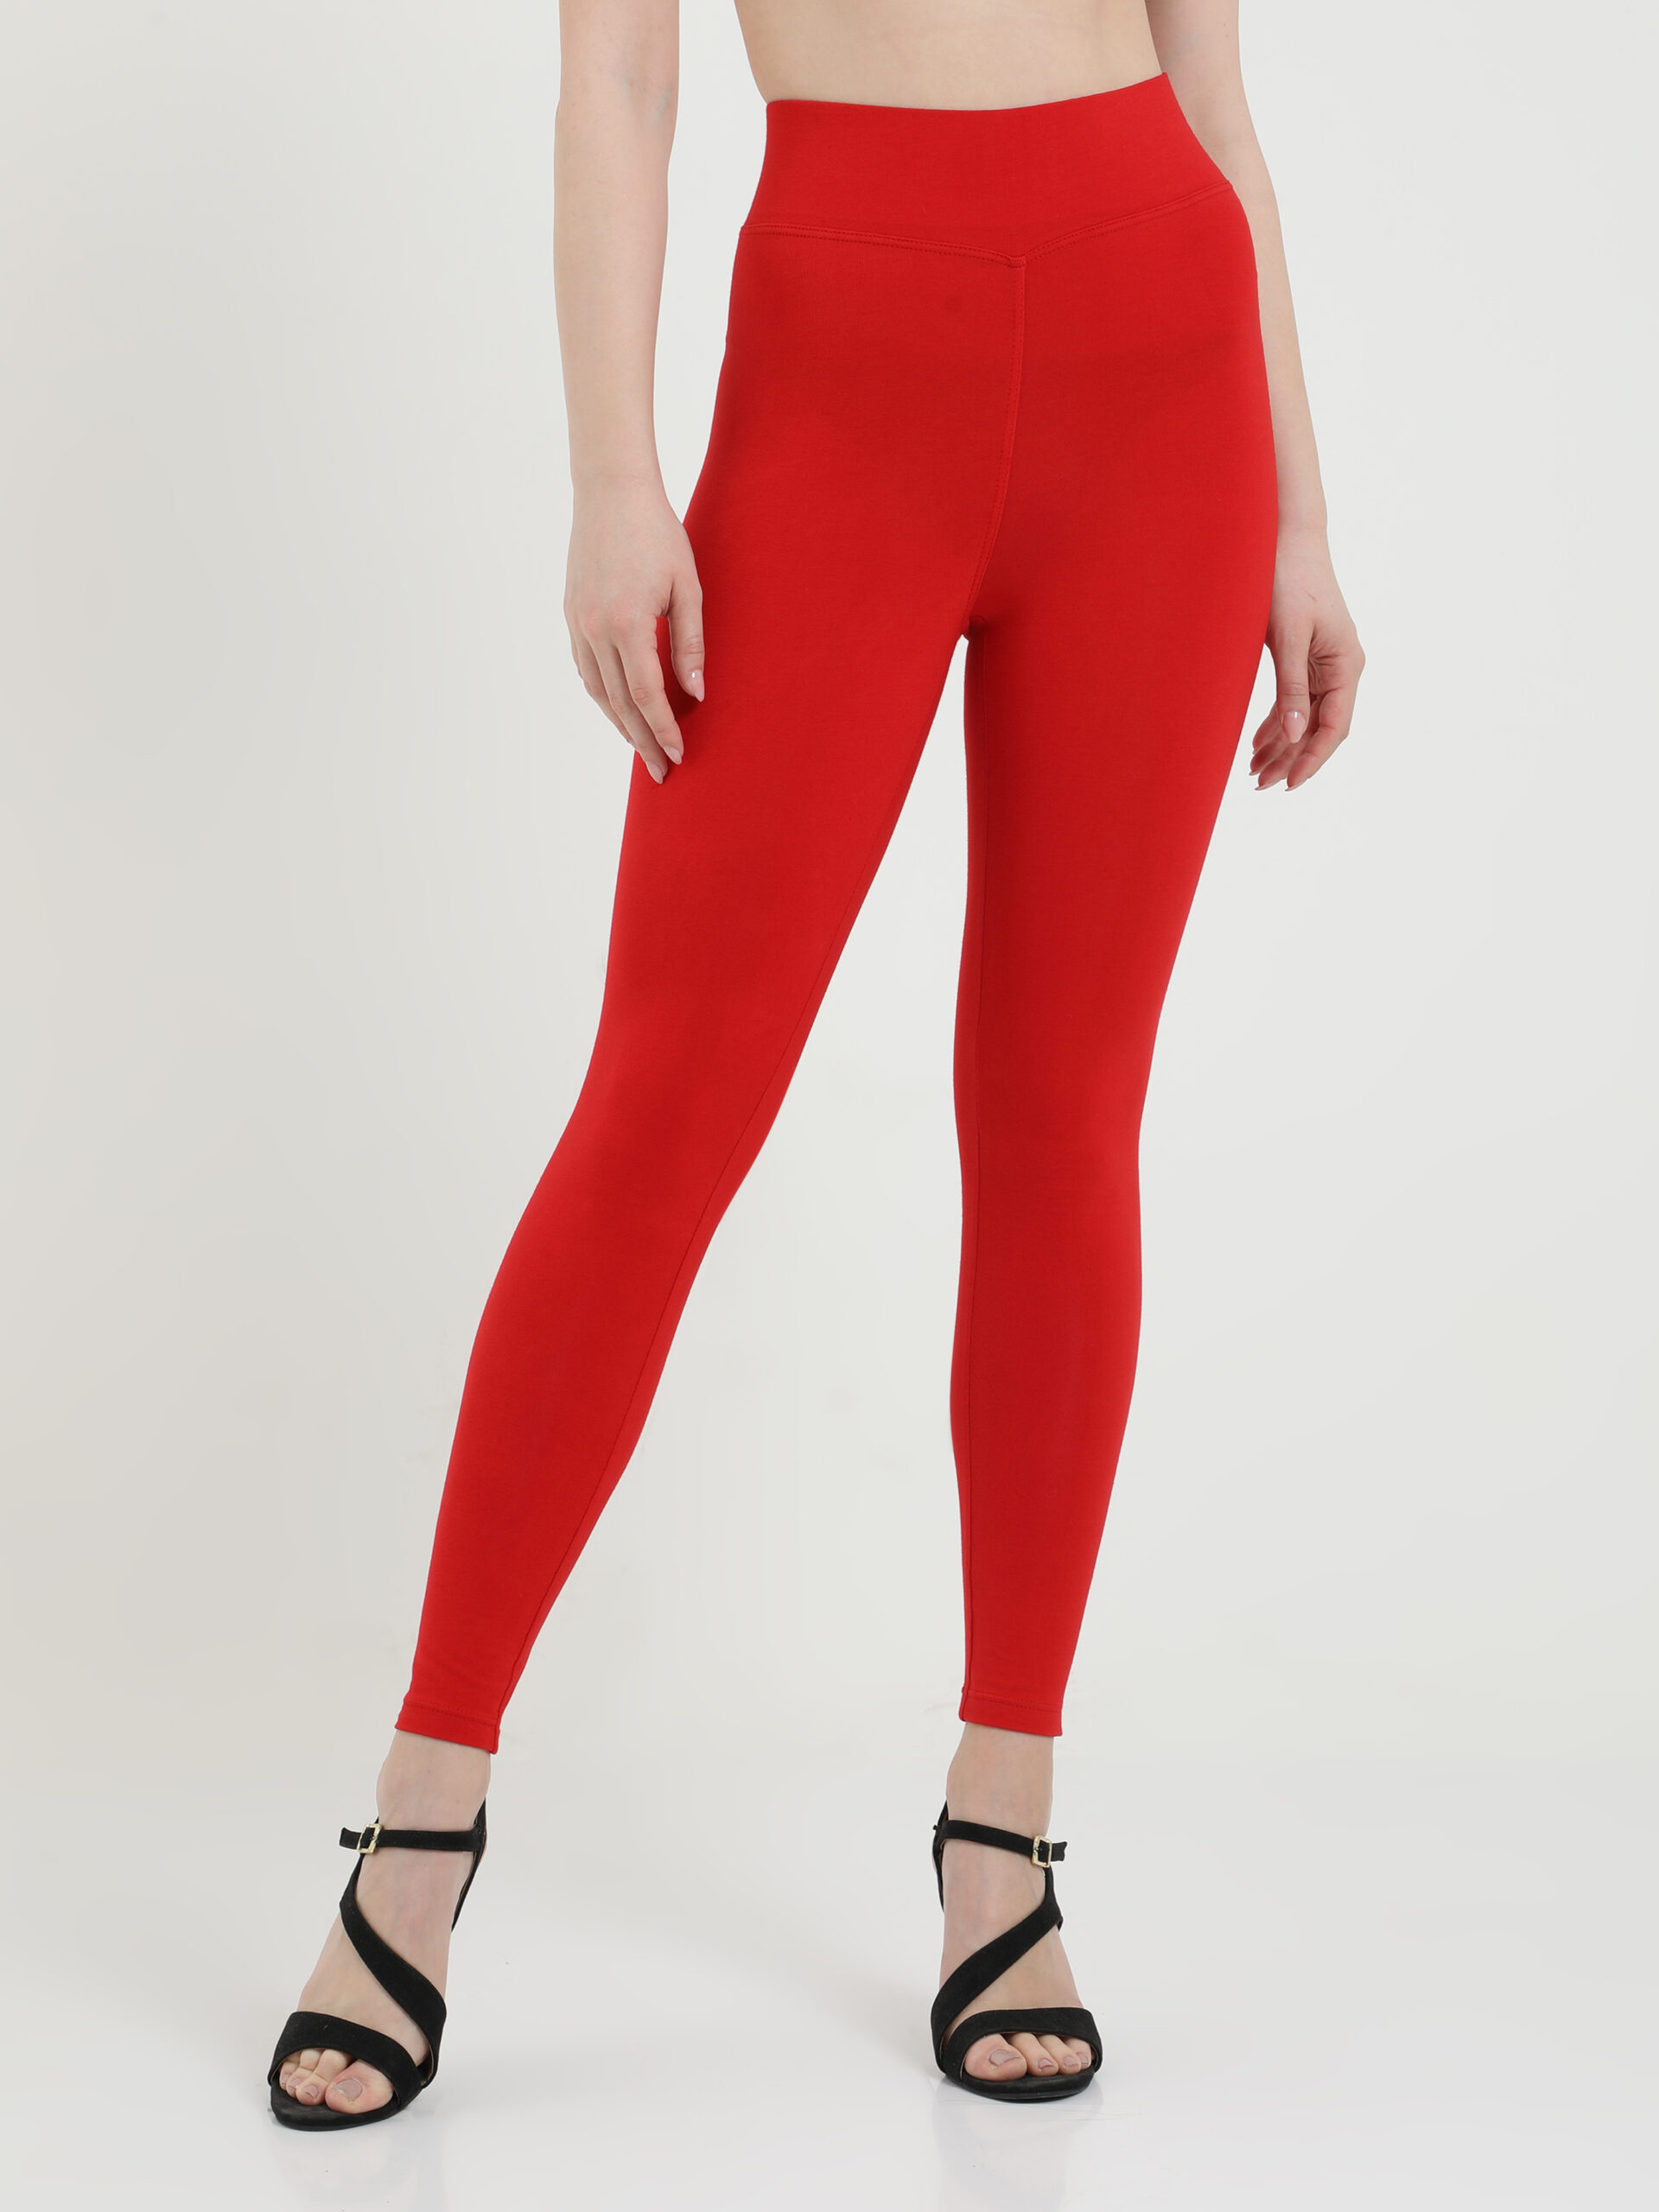 Red leggings for women Compression pant high waist - Belore Slims